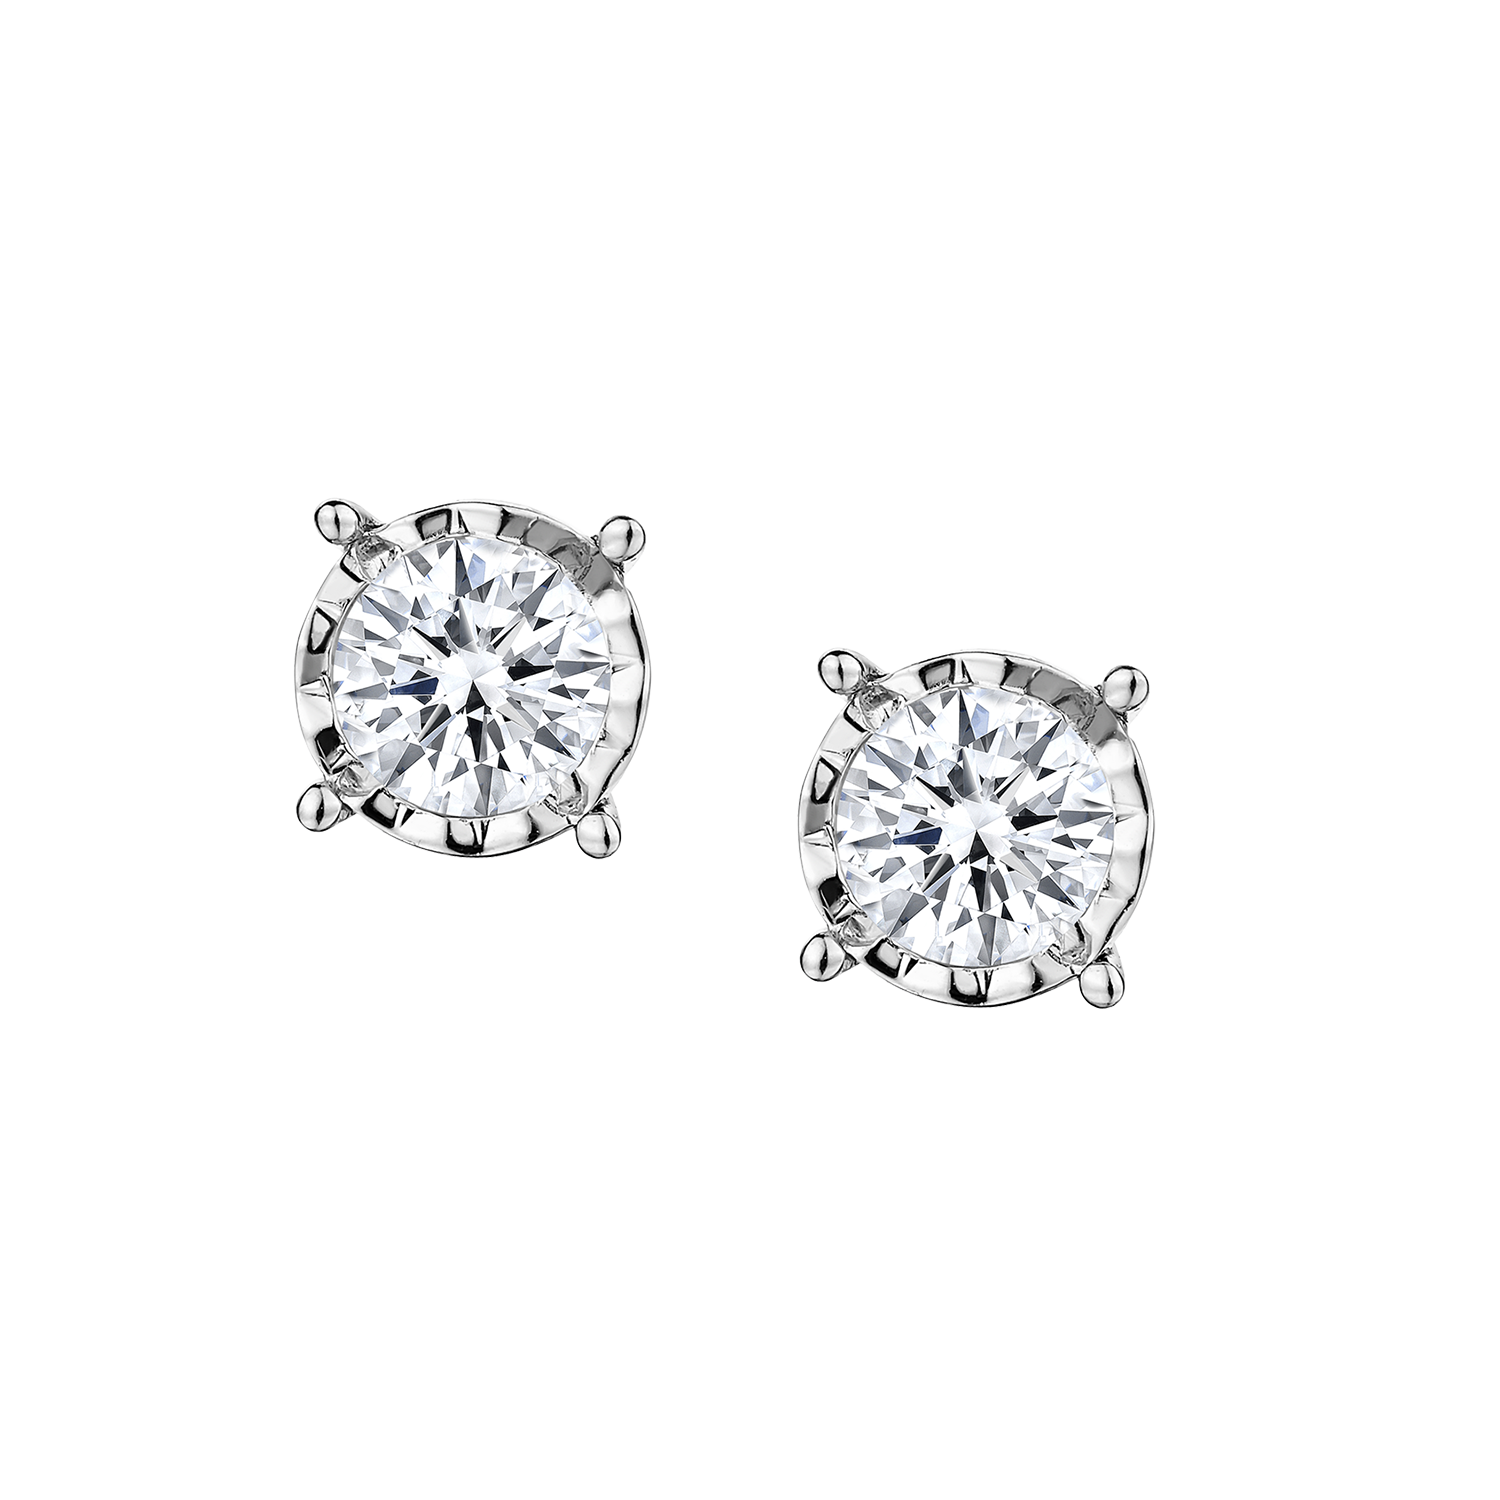 1.00 CARAT DIAMOND "MIRACLE" EARRINGS, 14kt WHITE GOLD......................NOW